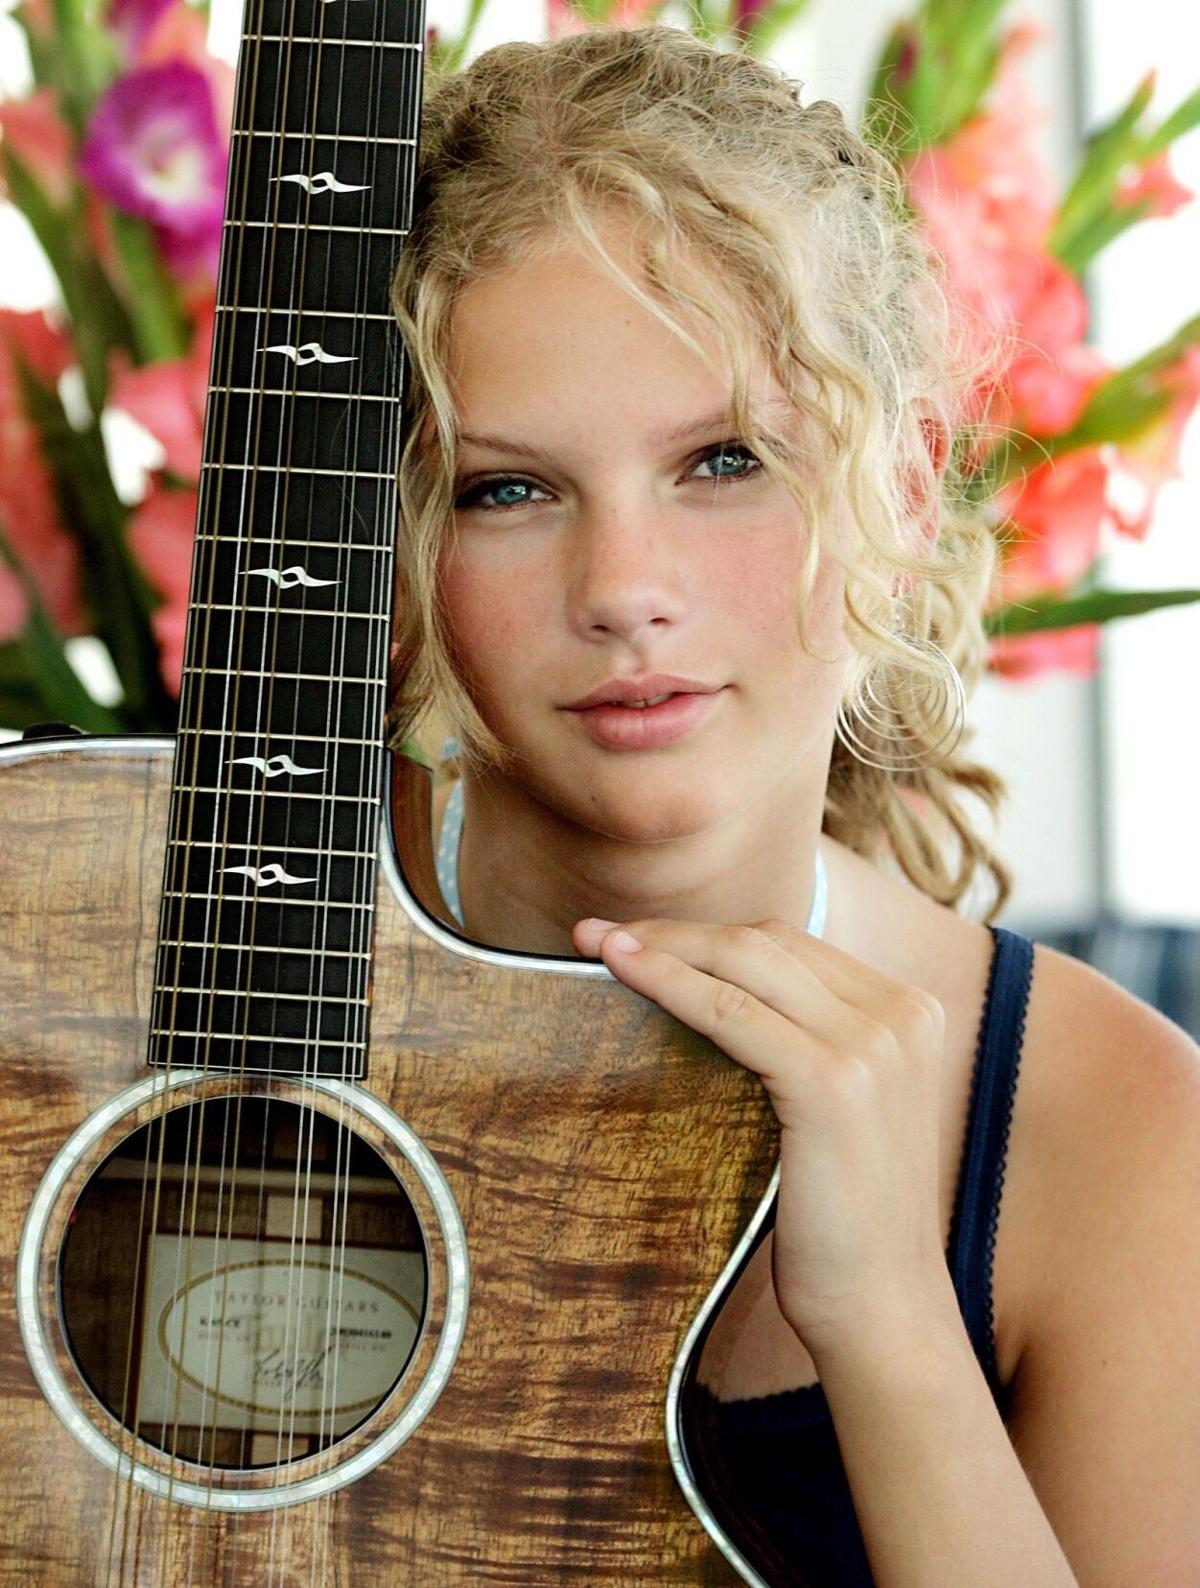 Taylor swift playing video games  Taylor swift country, Taylor swift, Taylor  swift pictures